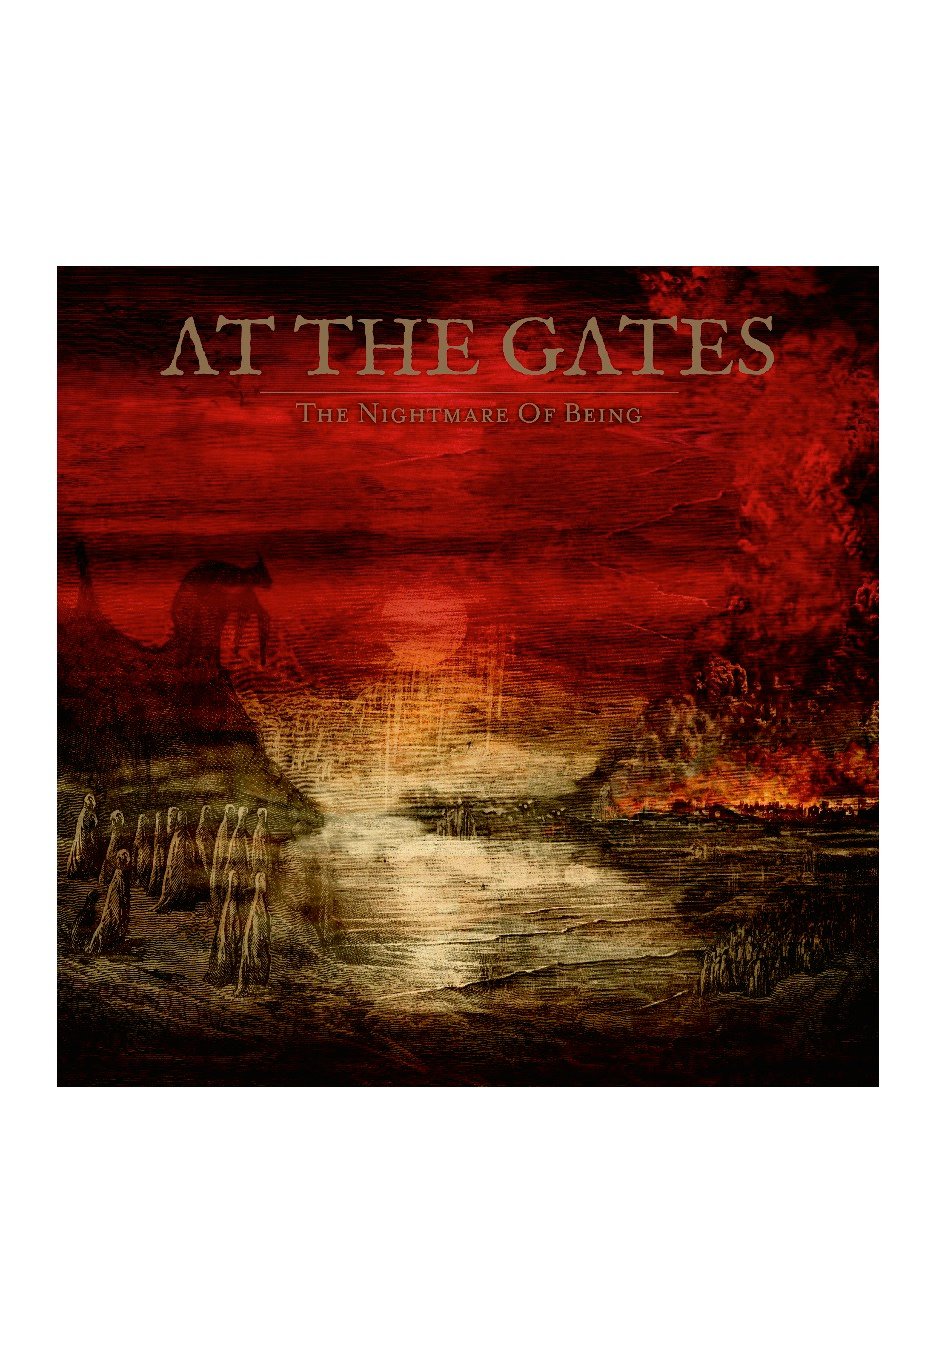 At The Gates - The Nightmare Of Being Ltd. Deluxe - Artbook